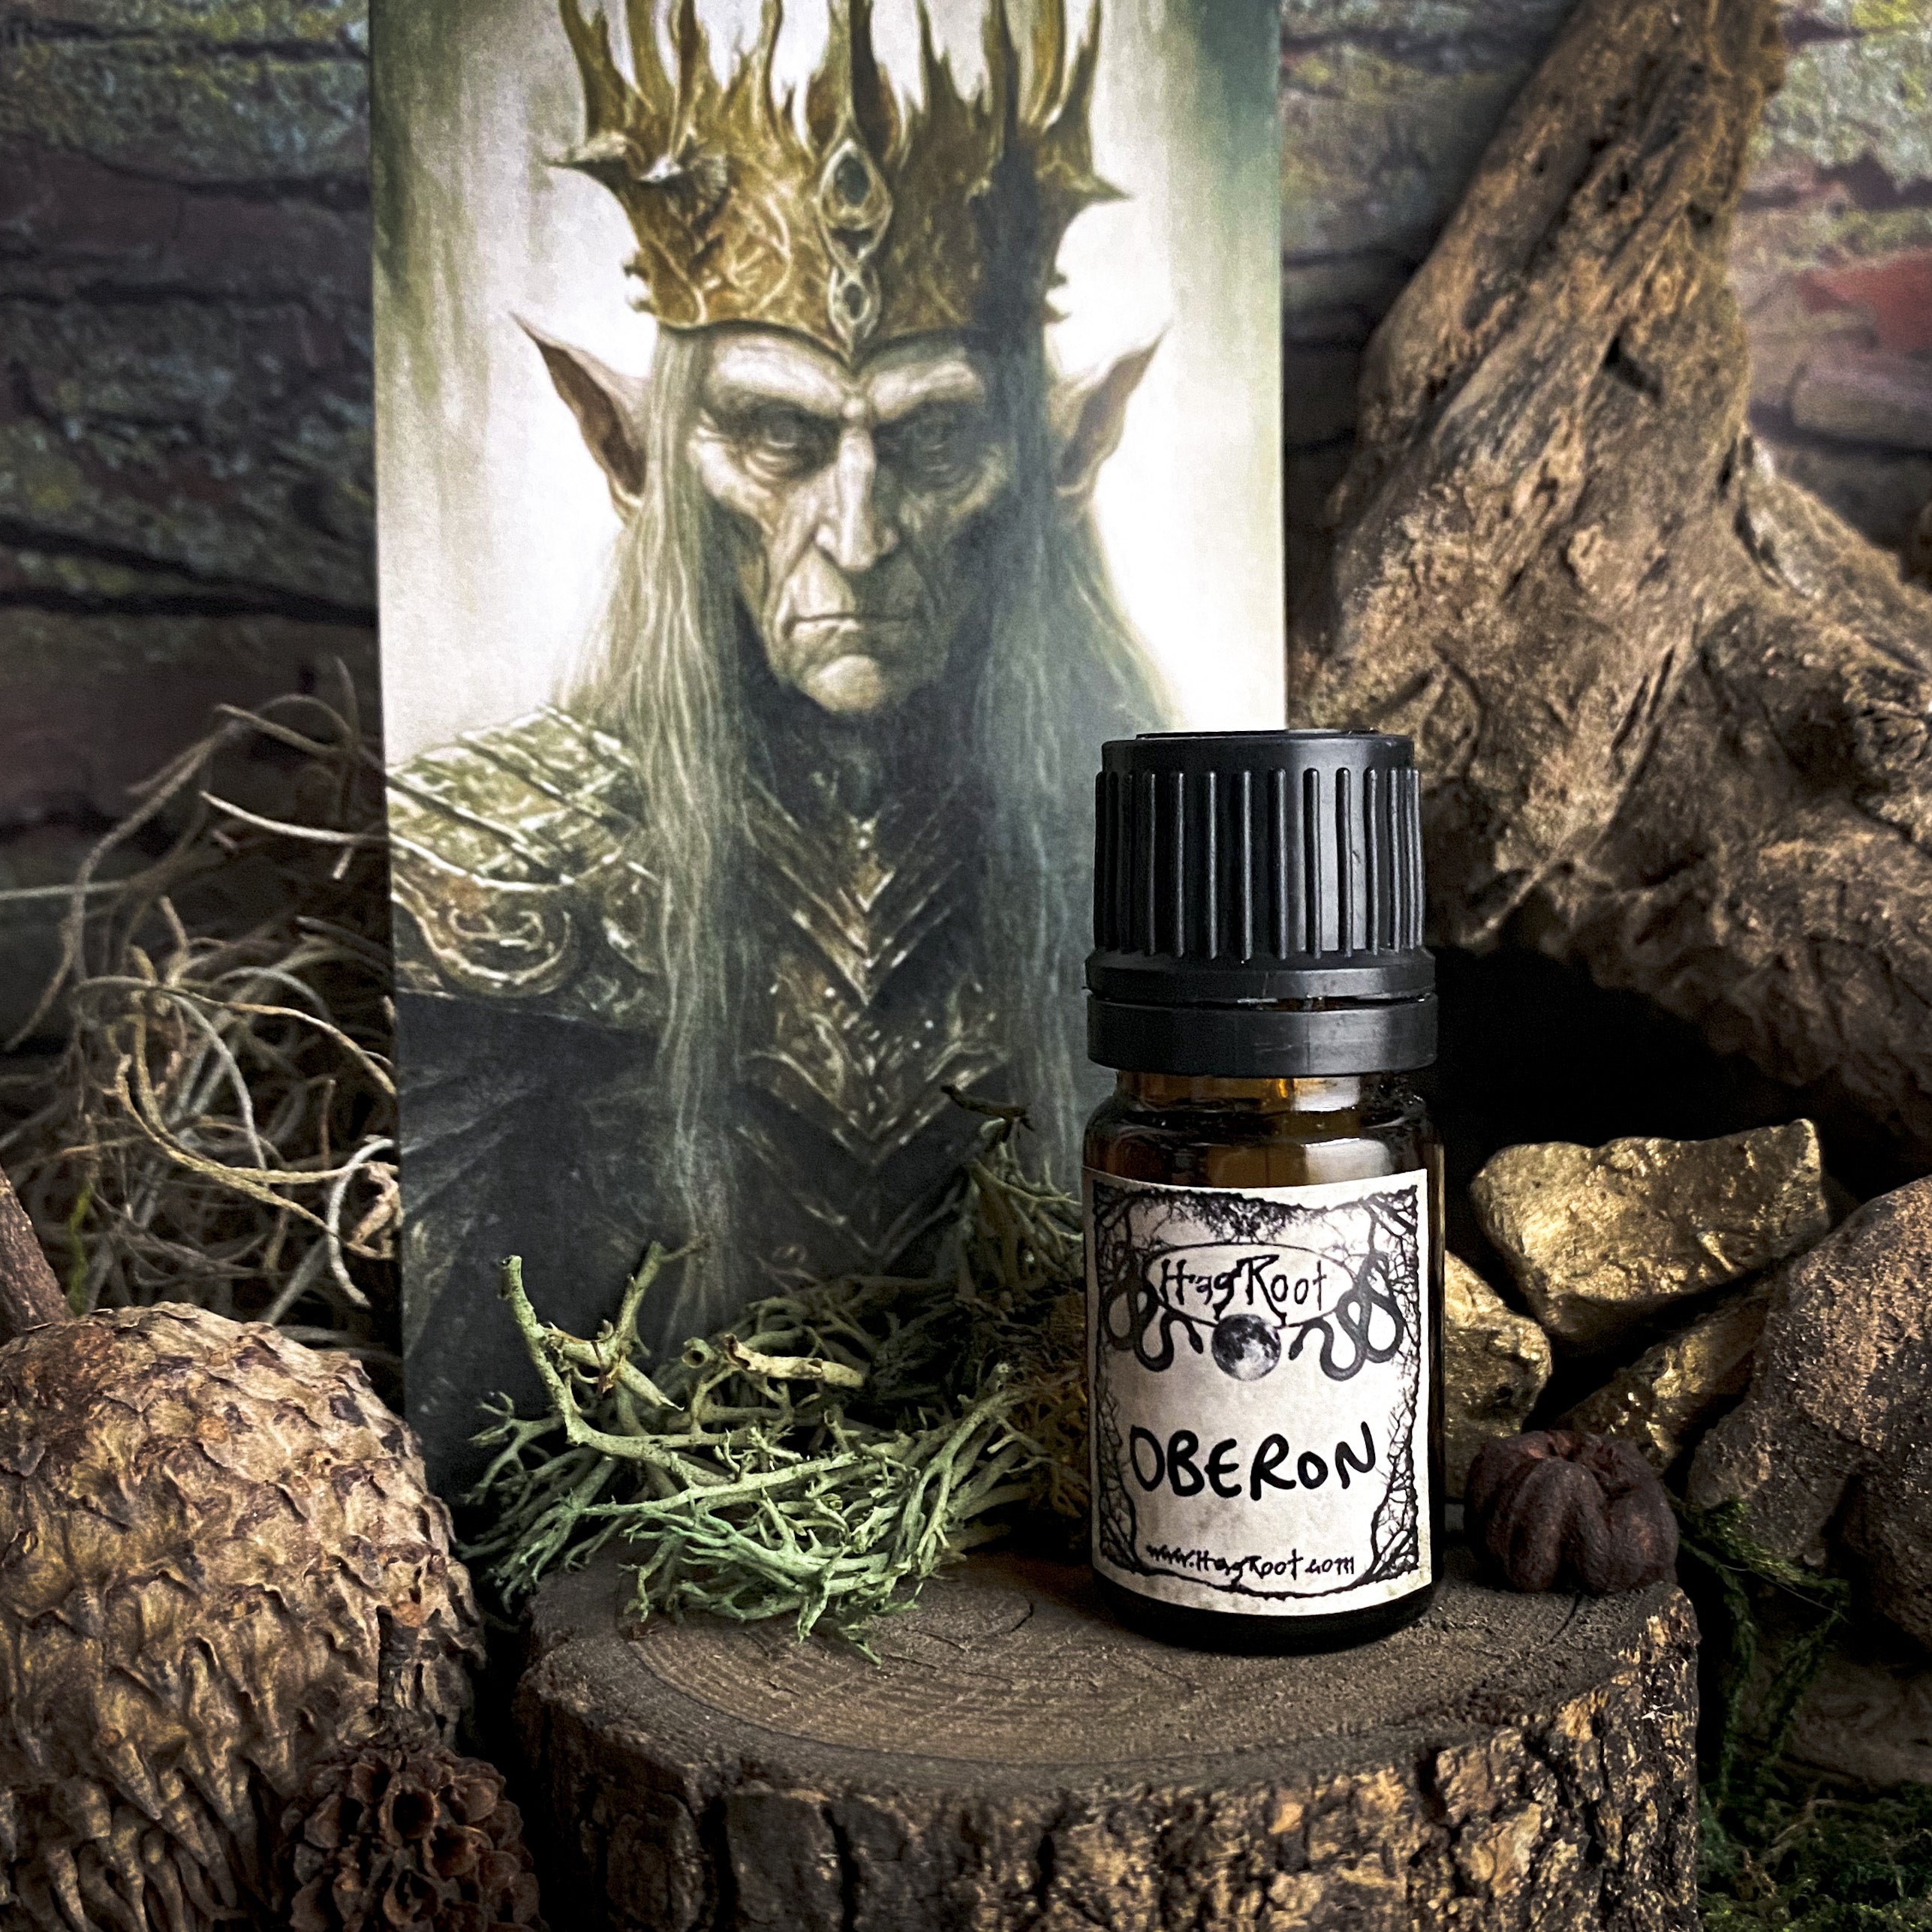 OBERON-(Smoked Woods, Patchouli, Dirt, Sweet Offerings)-Perfume, Cologne, Anointing, Ritual Oil